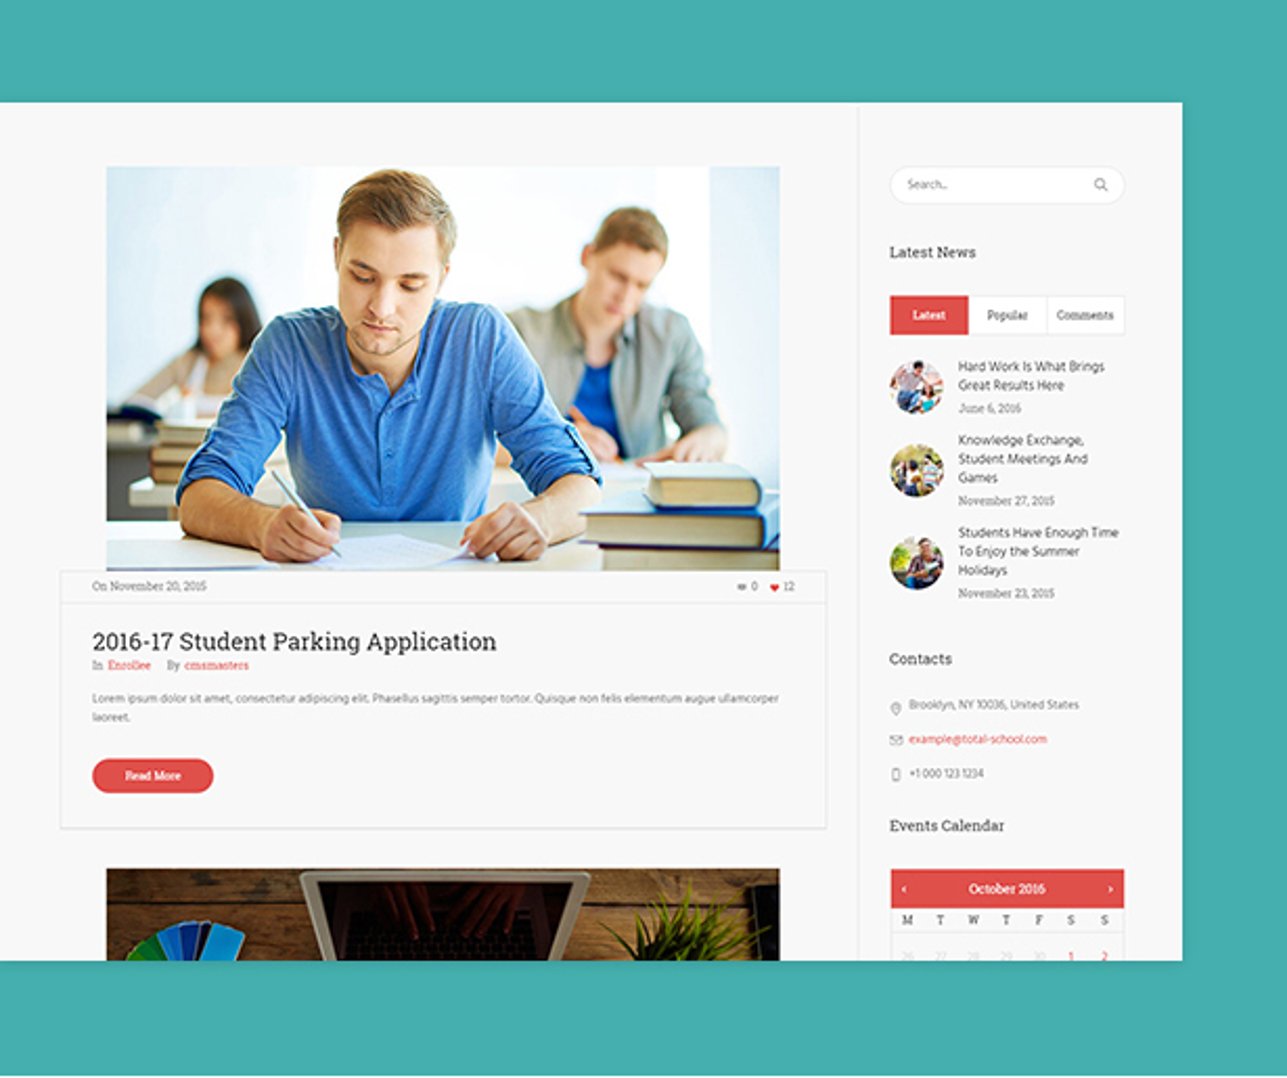 Total School - LMS and Education WordPress Theme - Blog Layouts